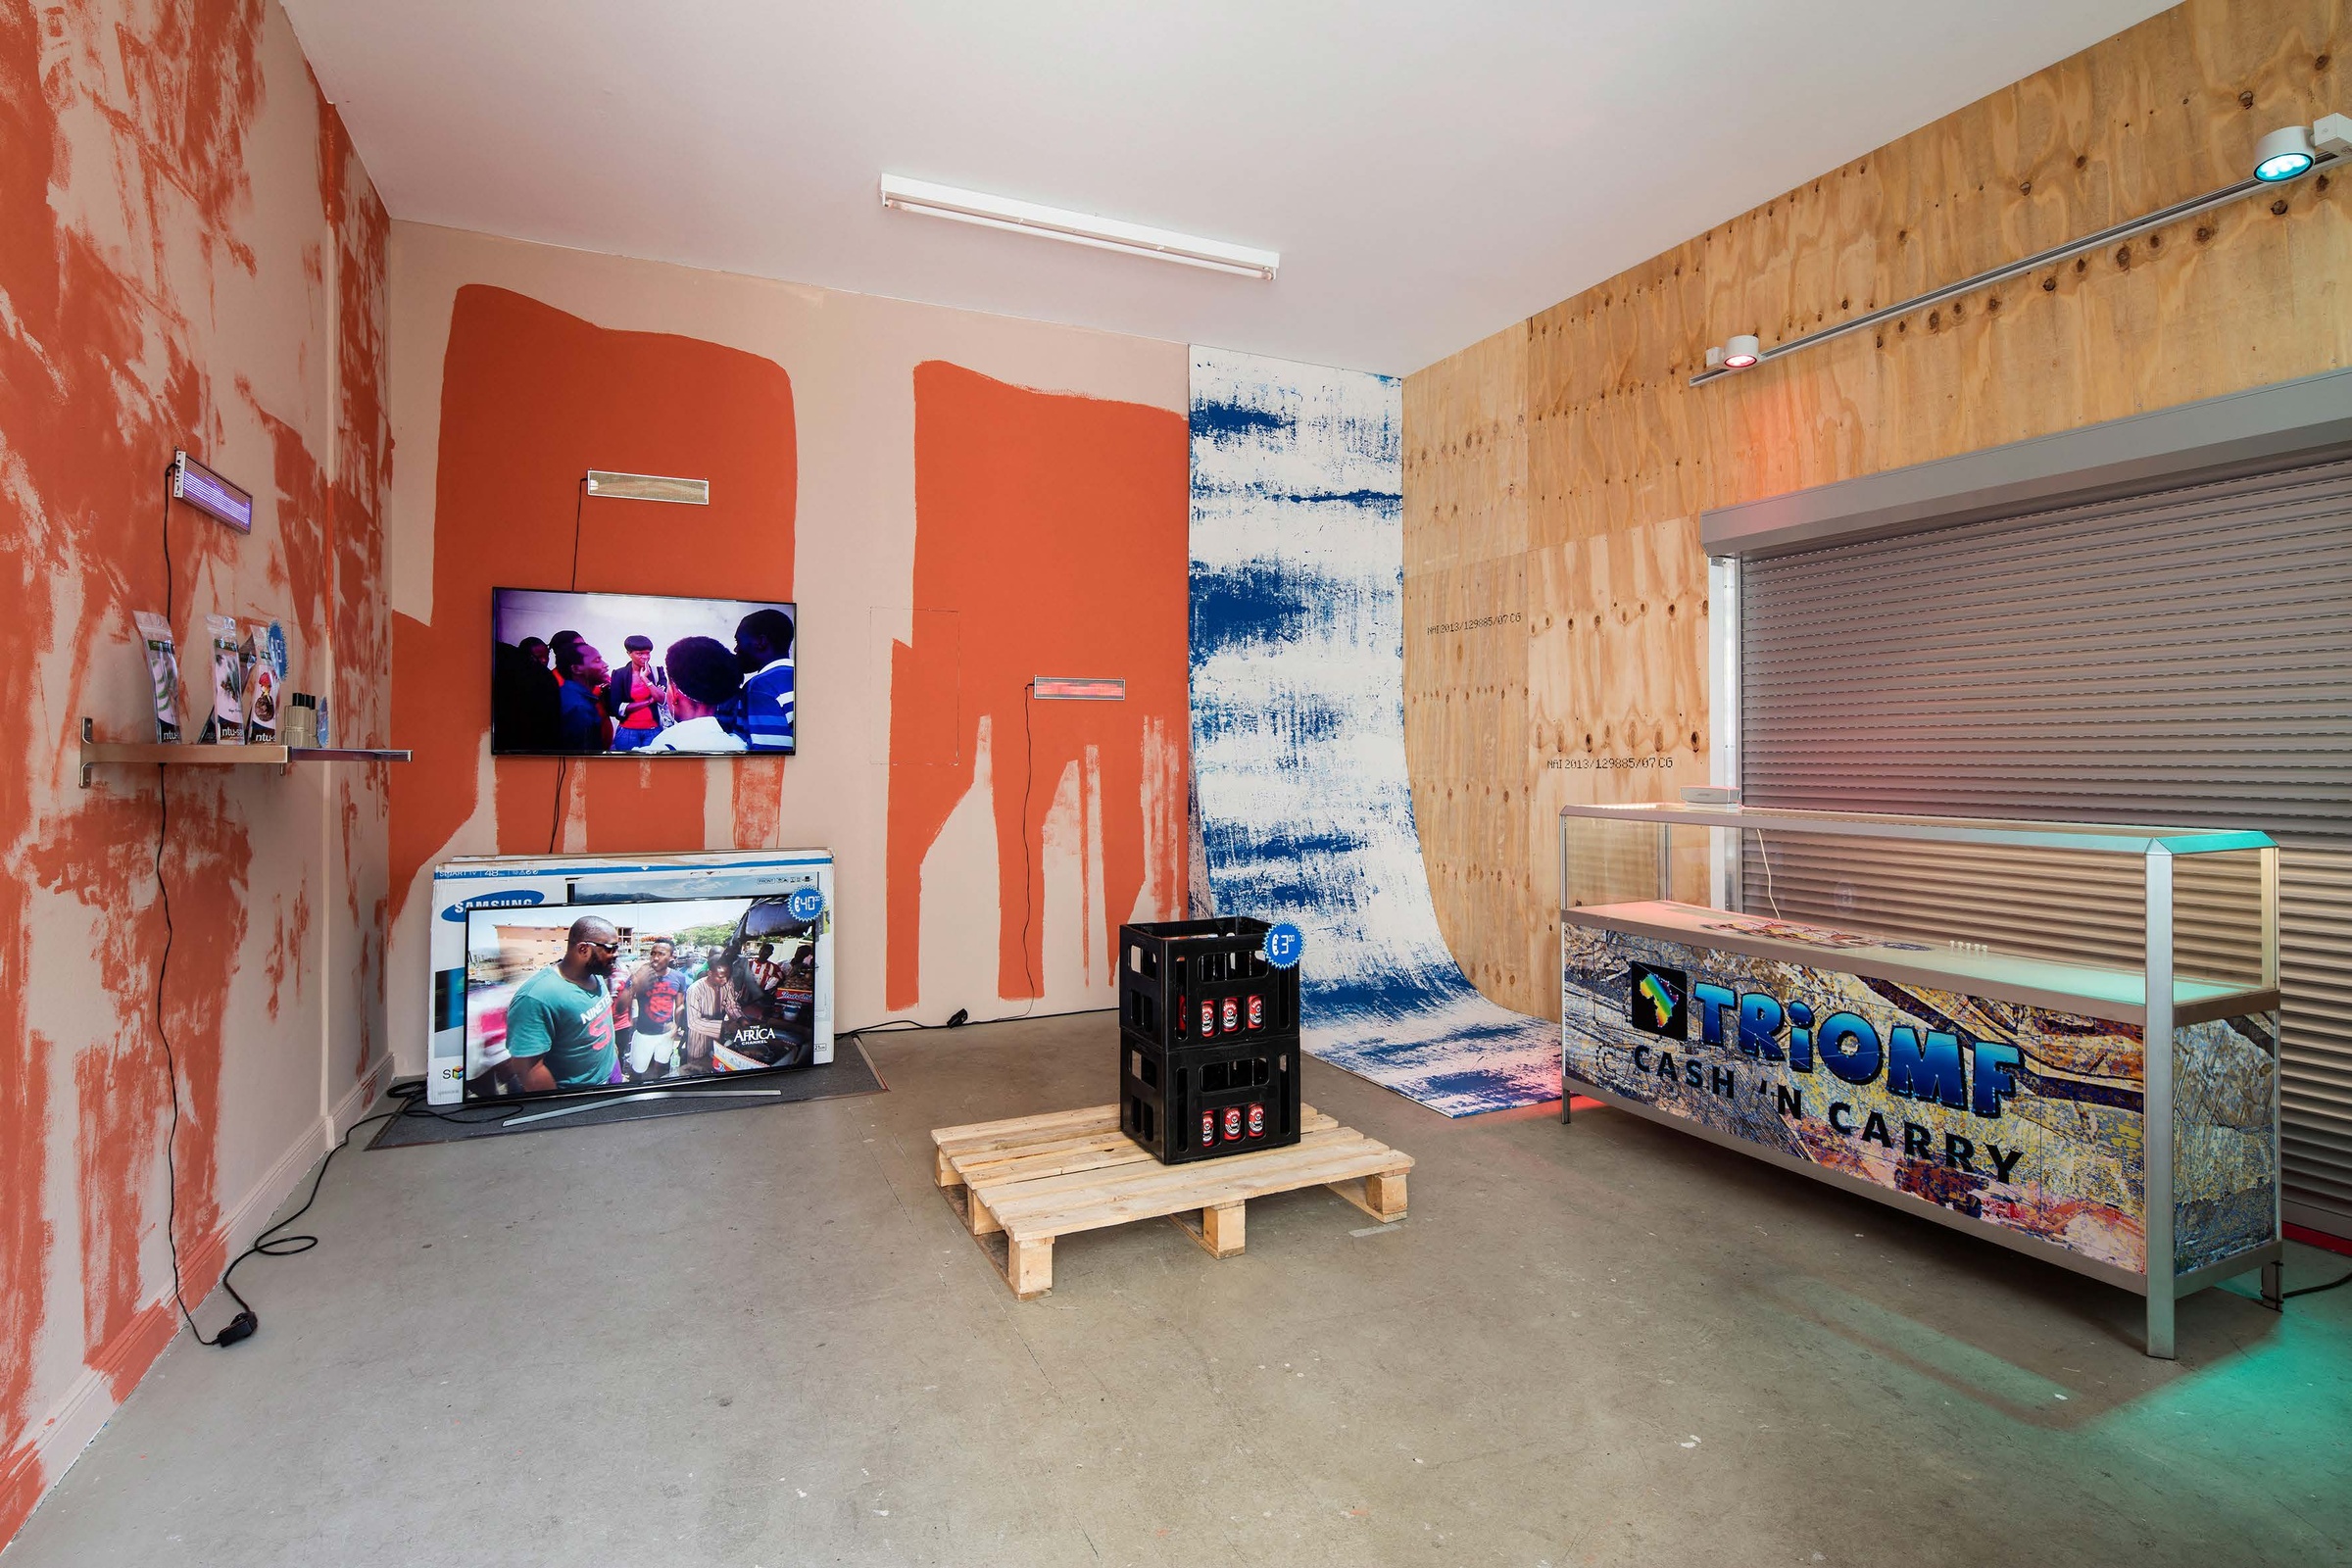 Photograph from the CUSS Group’s booth at the 2016 Berlin Biennale. On the left, printed matter is displayed on a wall mounted shelf, with the wall painted in two different shades of orange. At the back, a wall mounted screen and a screen sitting on the floor below it display video material, with the wall similarly painted. On the right, a cash ’n carry display case sits in front of a bare wood panelled wall. In the middle, a wooden pallet with a black plastic crate.
